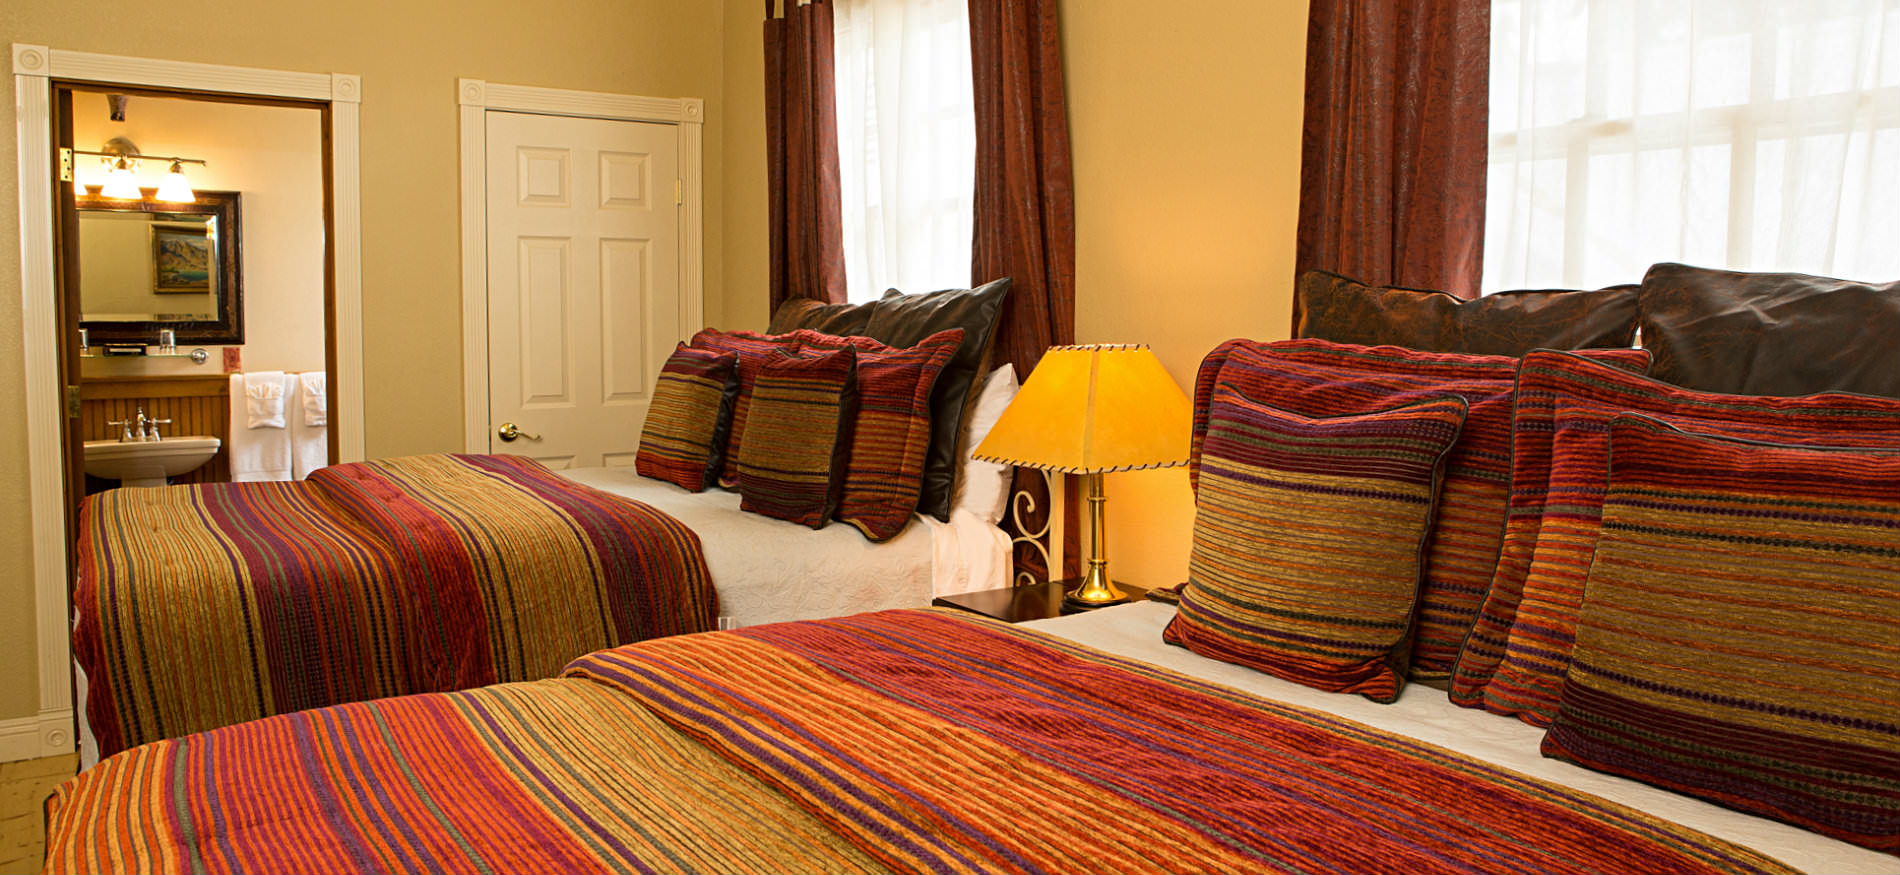 Bedroom with two beds covered in red and gold striped bedspreads, a nightstand, and two large windows